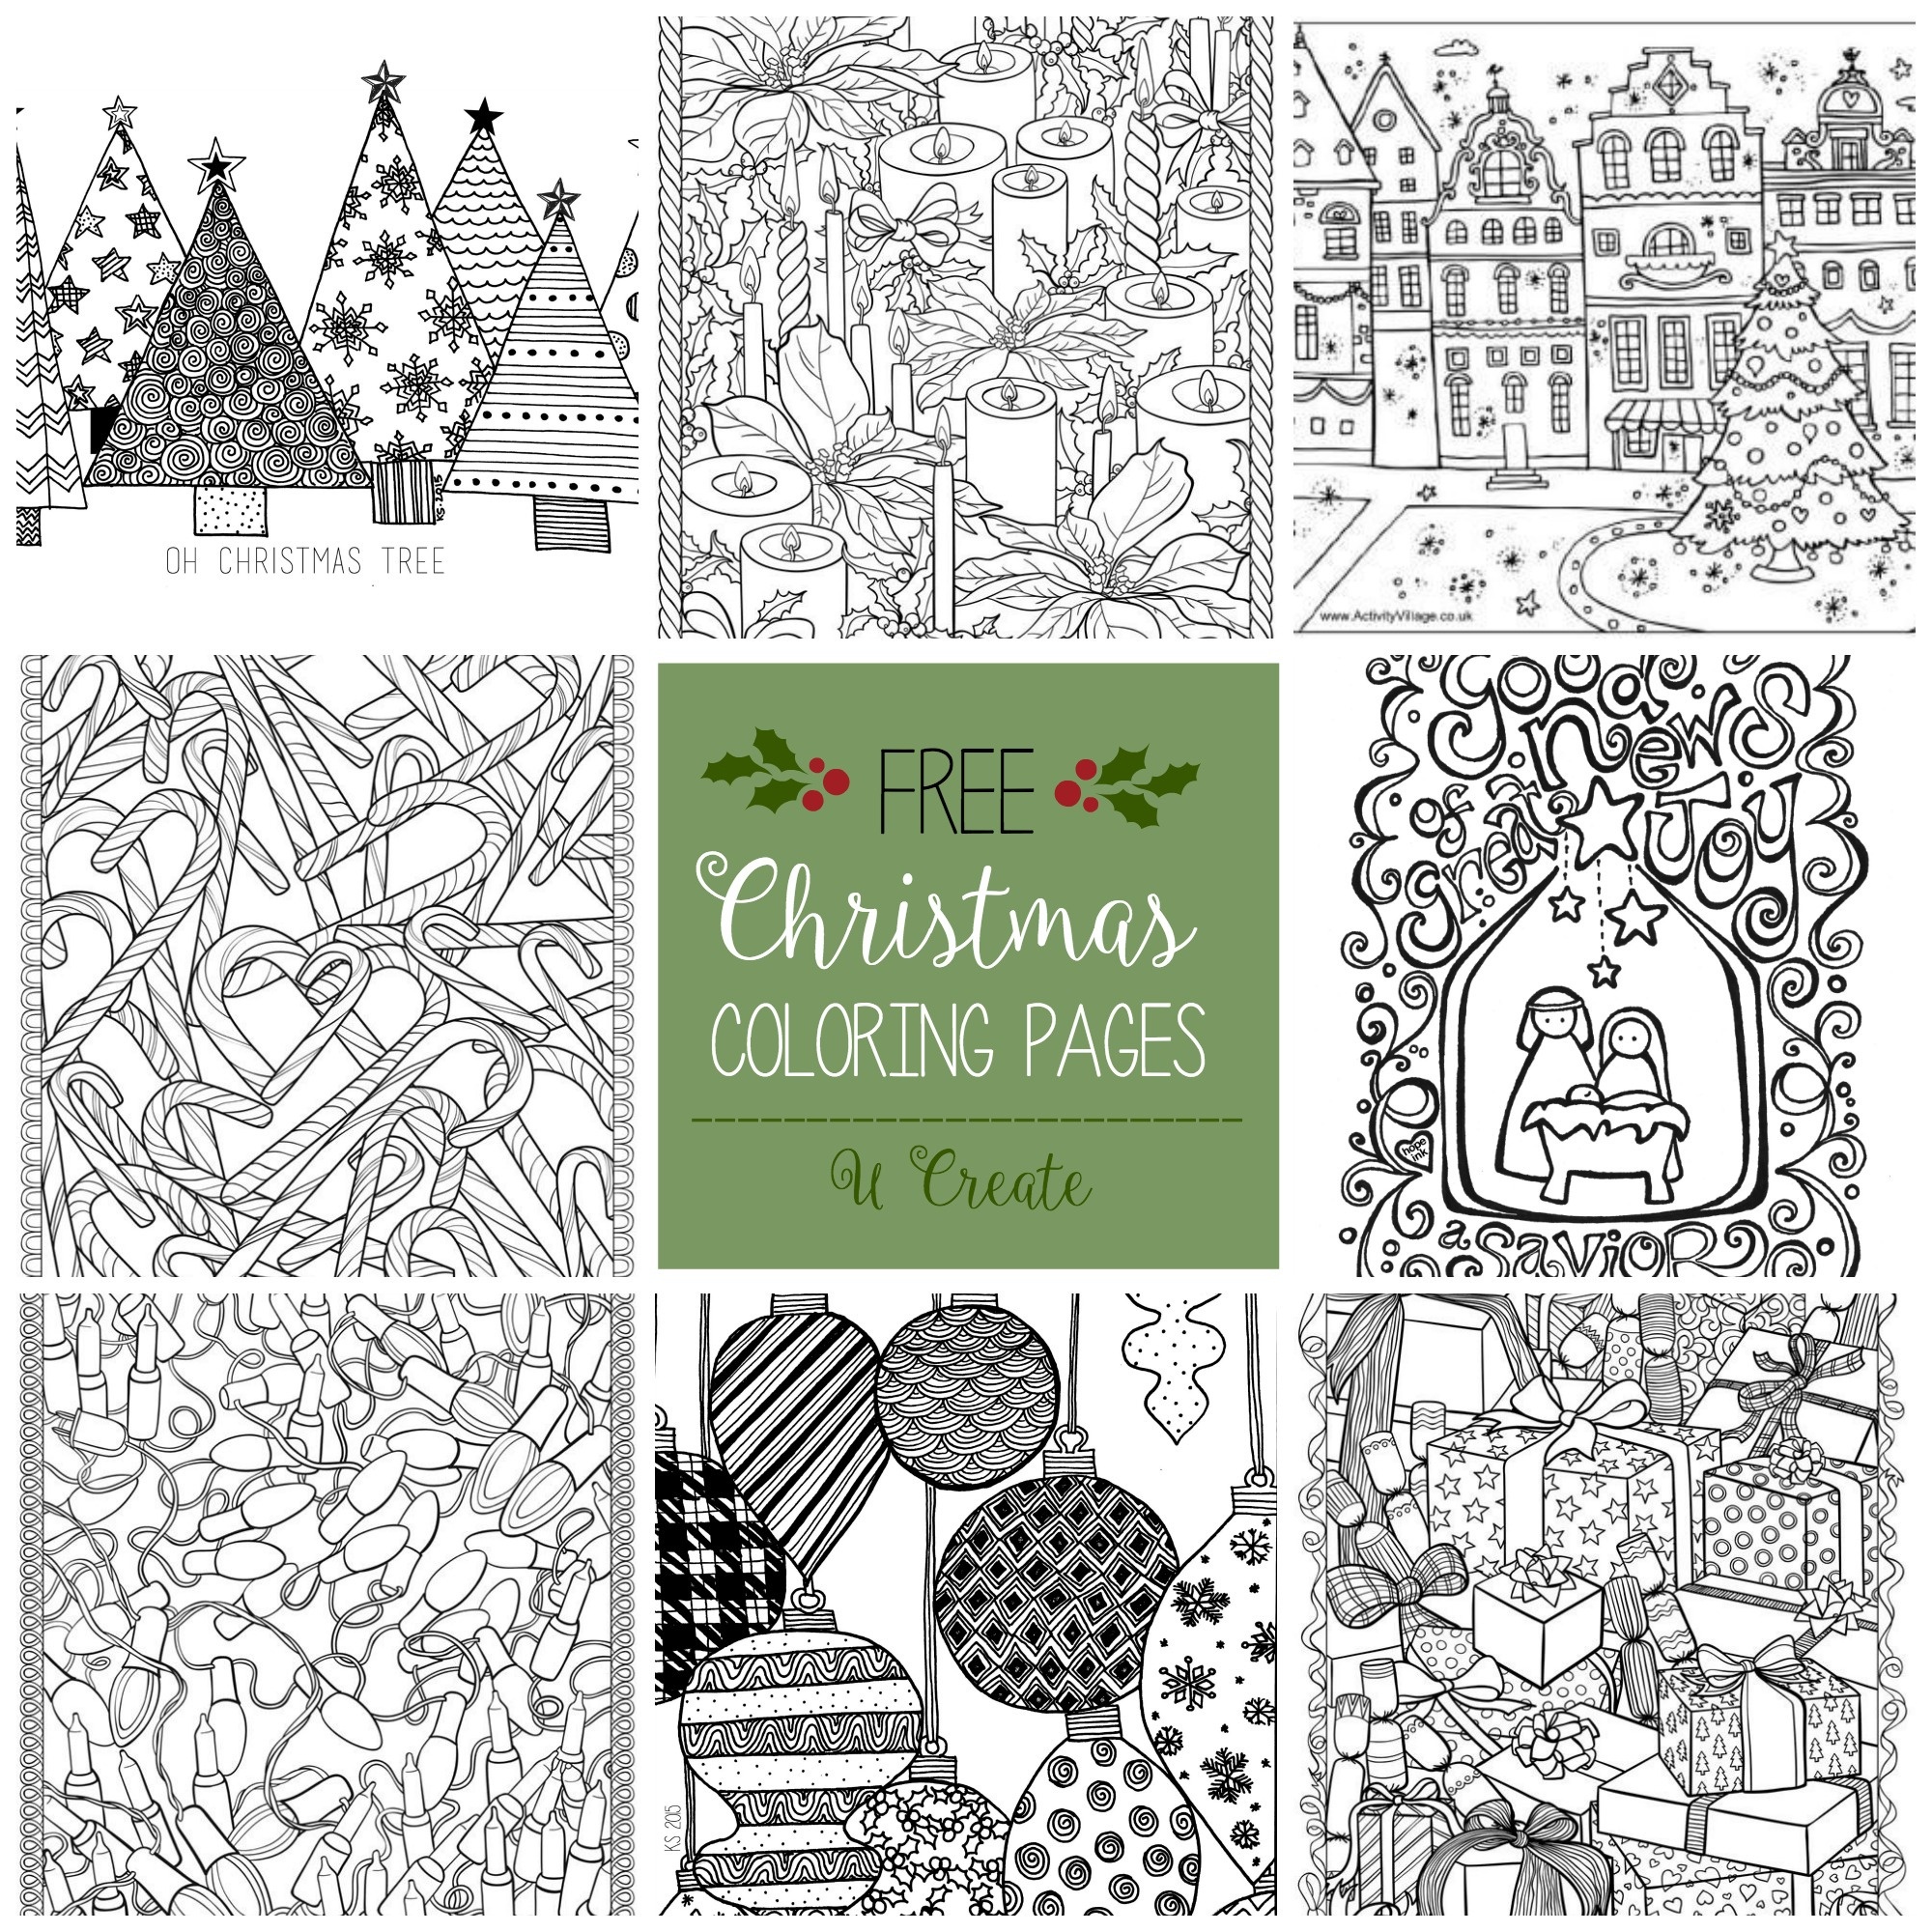 Free Christmas Adult Coloring Pages - U Create - Free Printable Coloring Cards For Adults